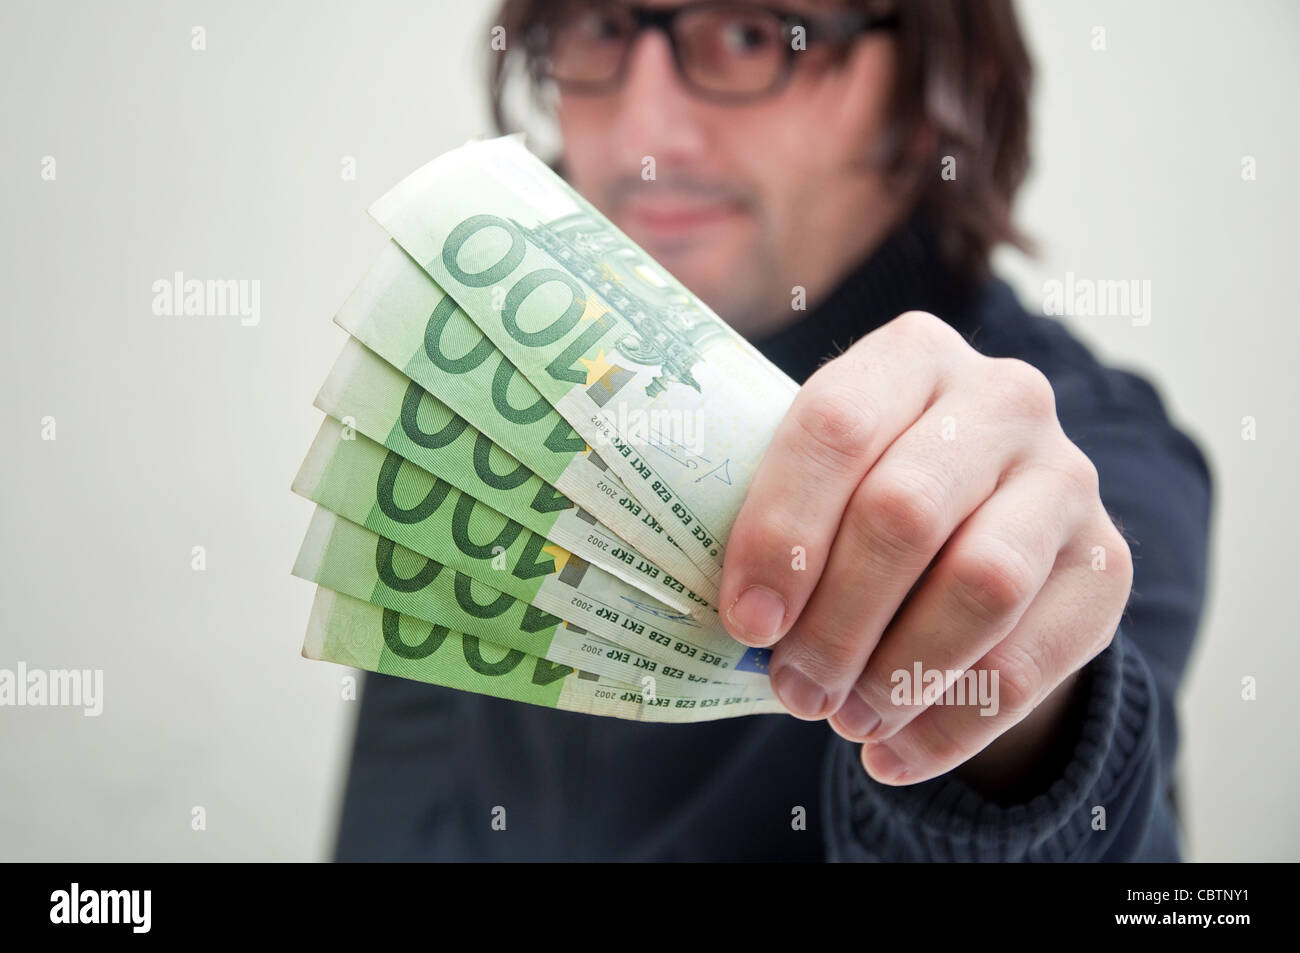 Casual adult man is paying in euros, corruption and bribe concept. Stock Photo